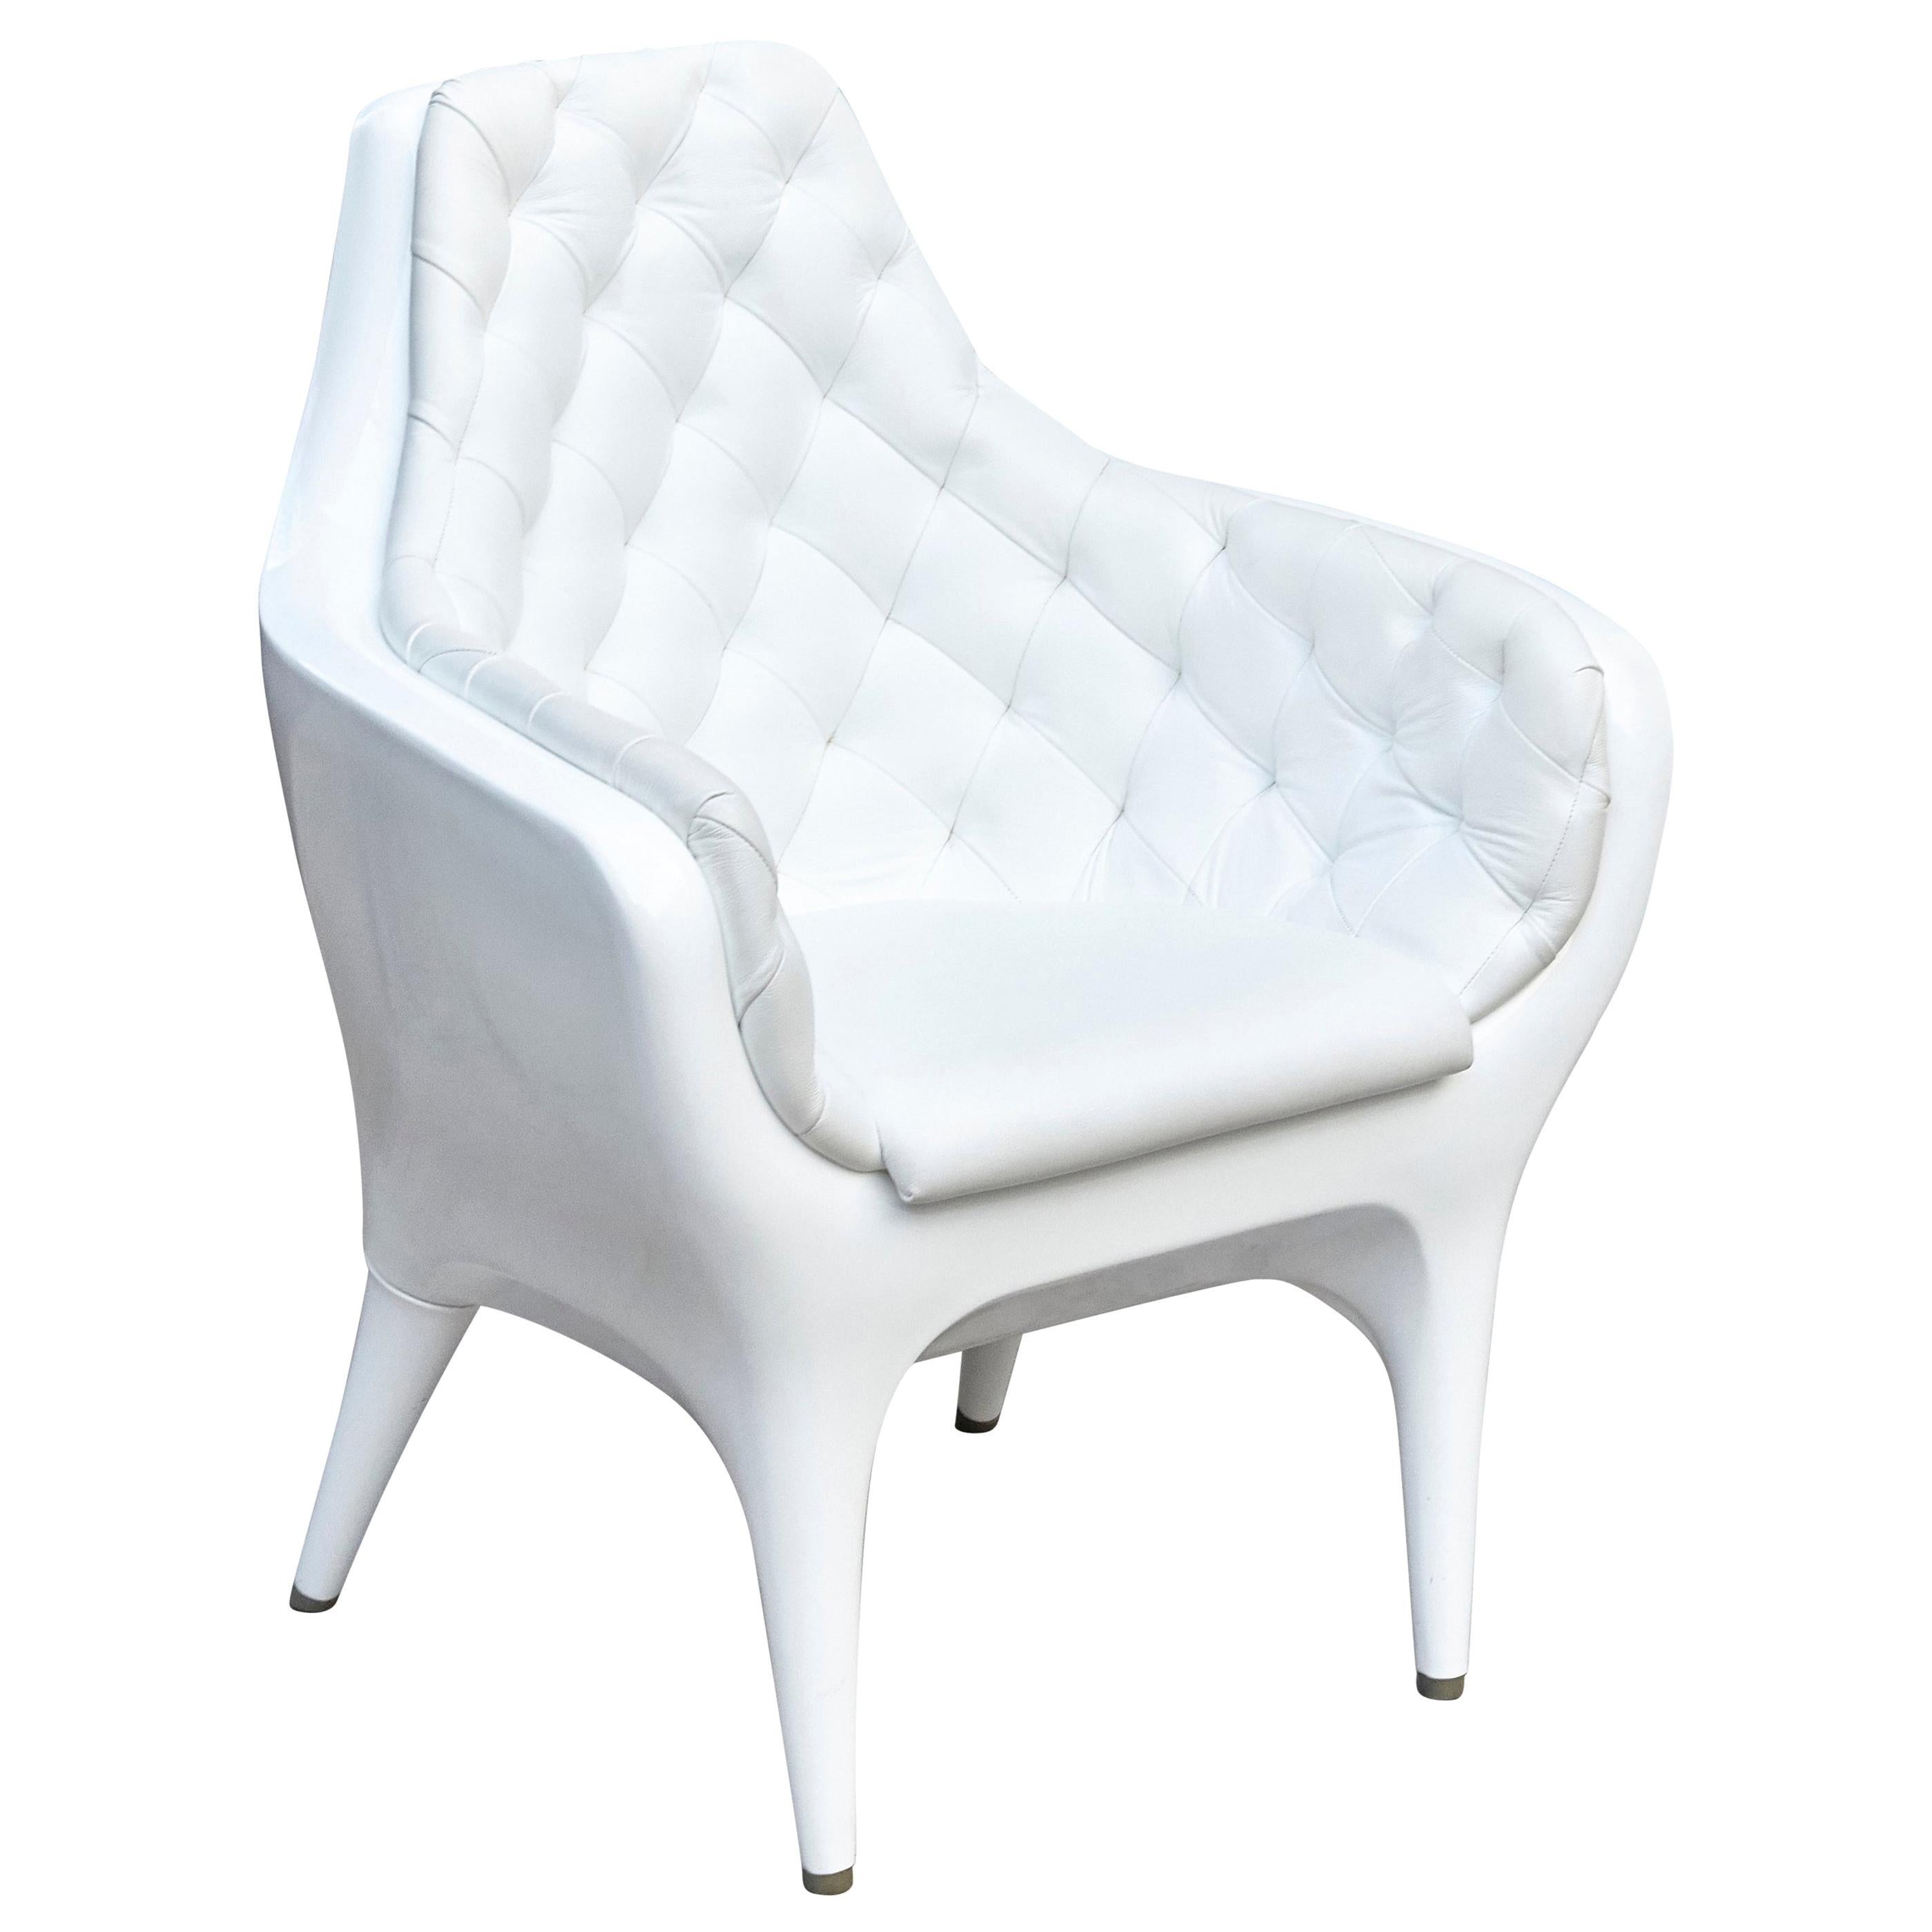 White Jaime Hayon Contemporary Showtime Armchair Lacquered